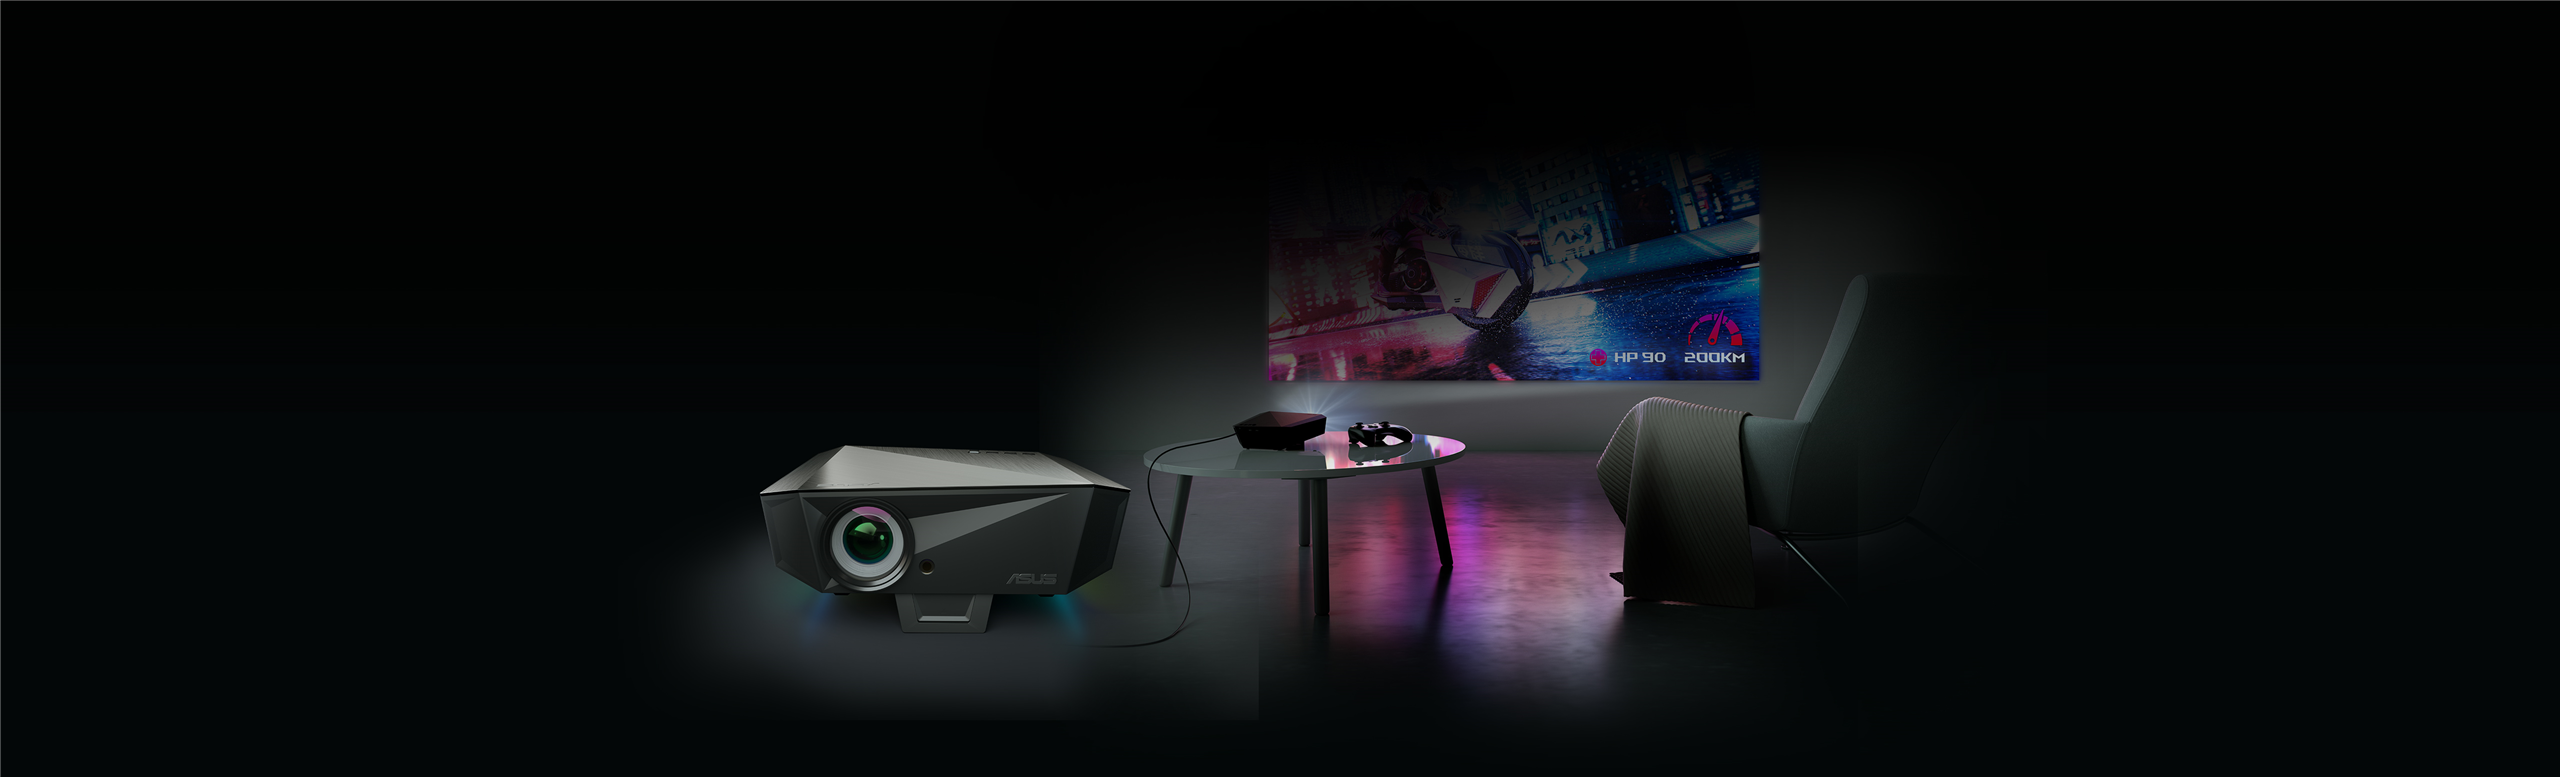 ASUS F1 LED projector product photo with a background image of using the projector to play game in the living room